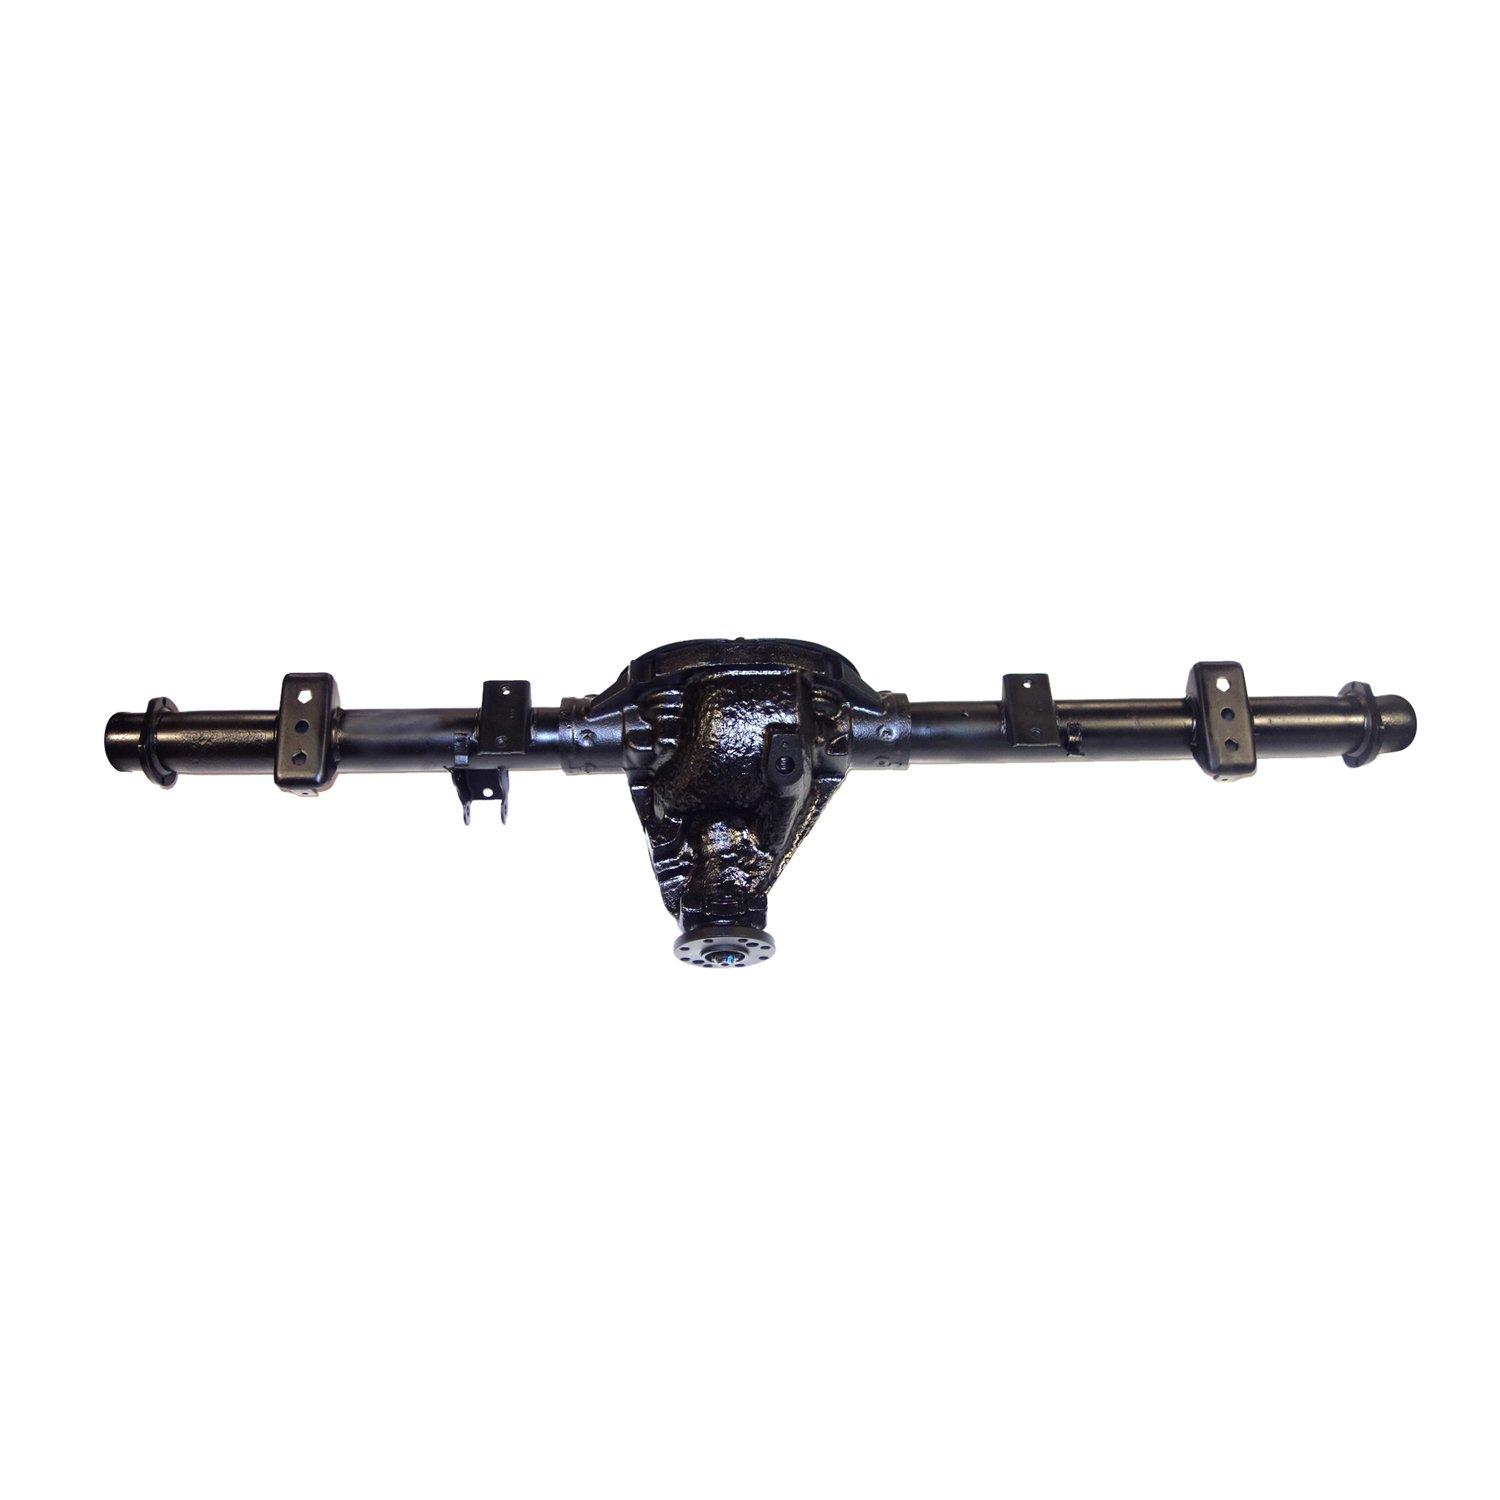 Remanufactured Complete Axle Assembly for Chy 8.25" 03-04 Dakota 3.55 , 4x4, Posi LSD